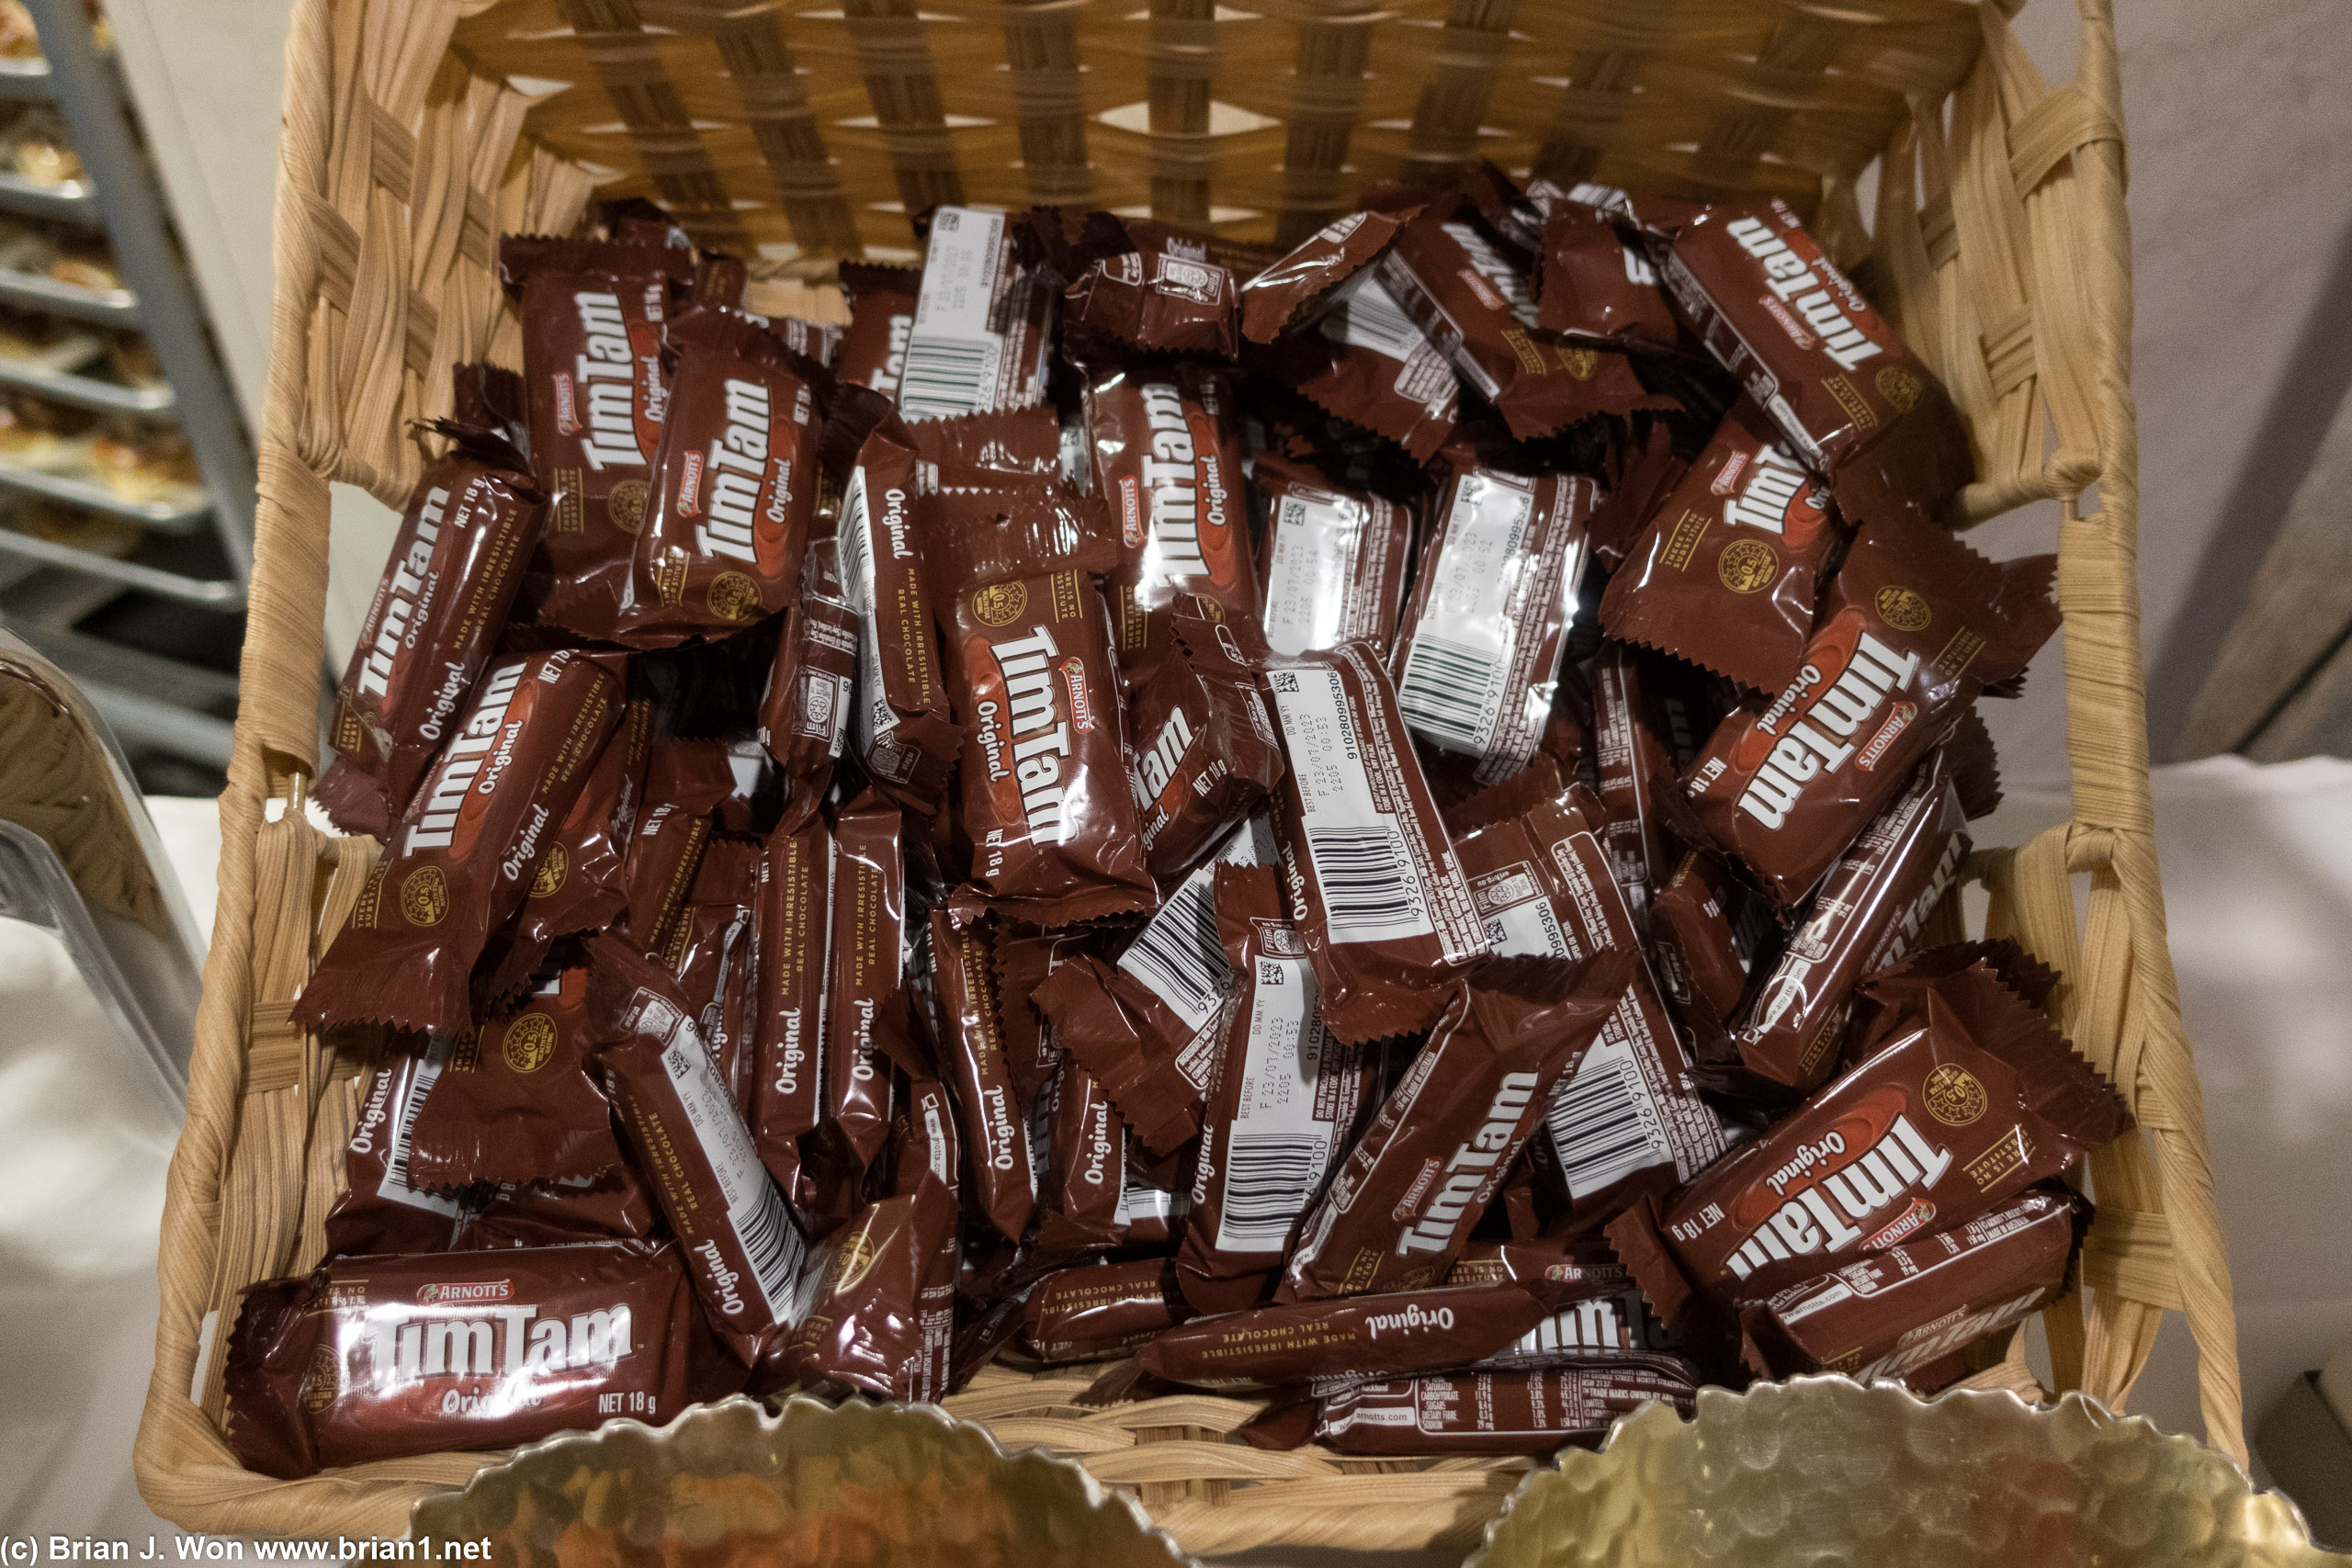 Of course, Tim Tams.